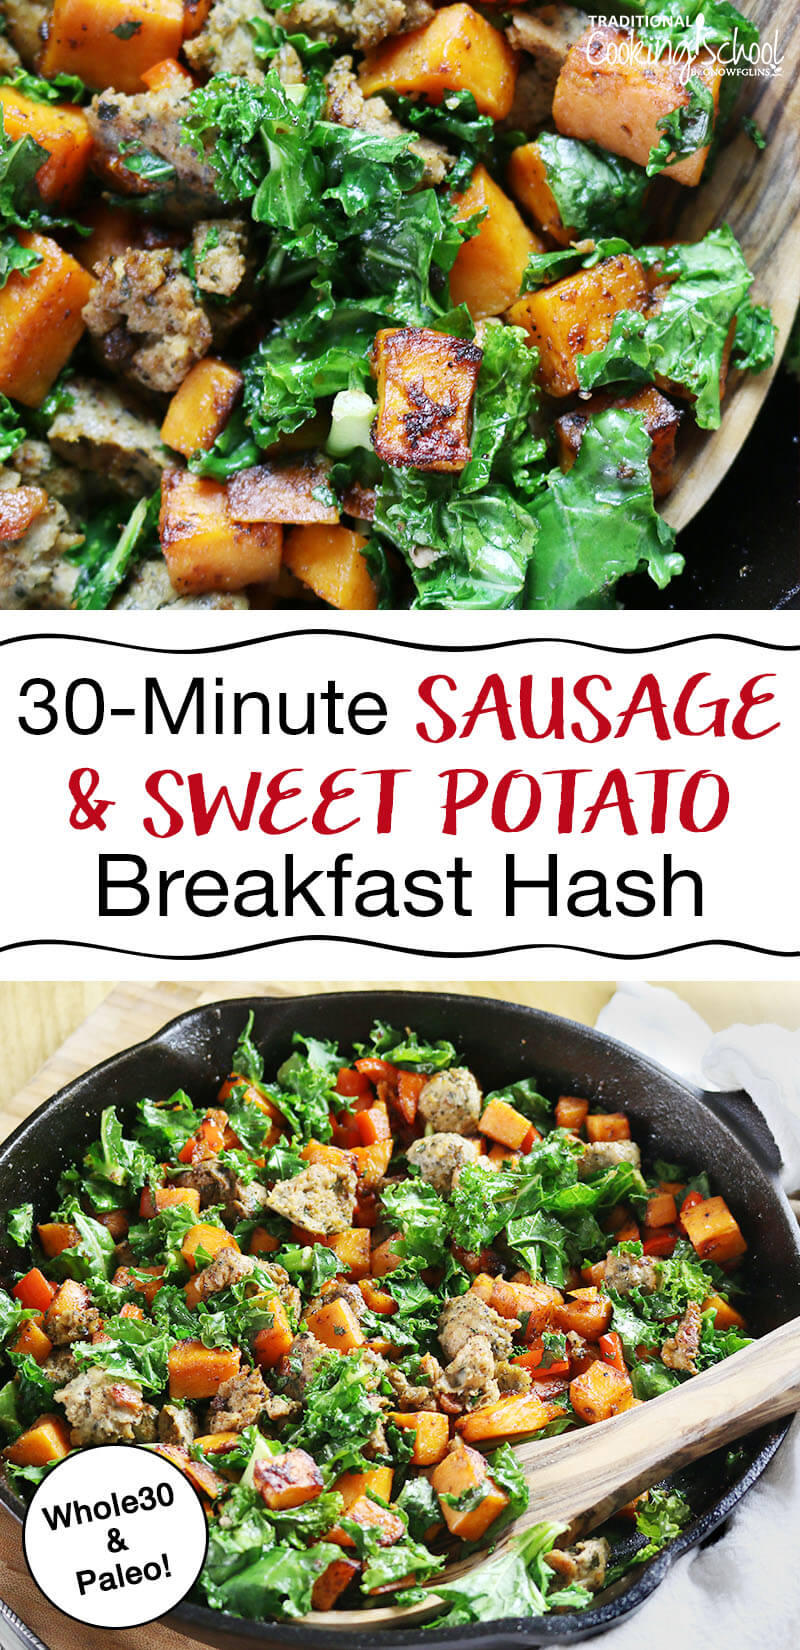 photo collage of colorful veggie-rich breakfast hash in a cast iron skillet with text overlay: "30-Minute Sausage & Sweet Potato Breakfast Hash"